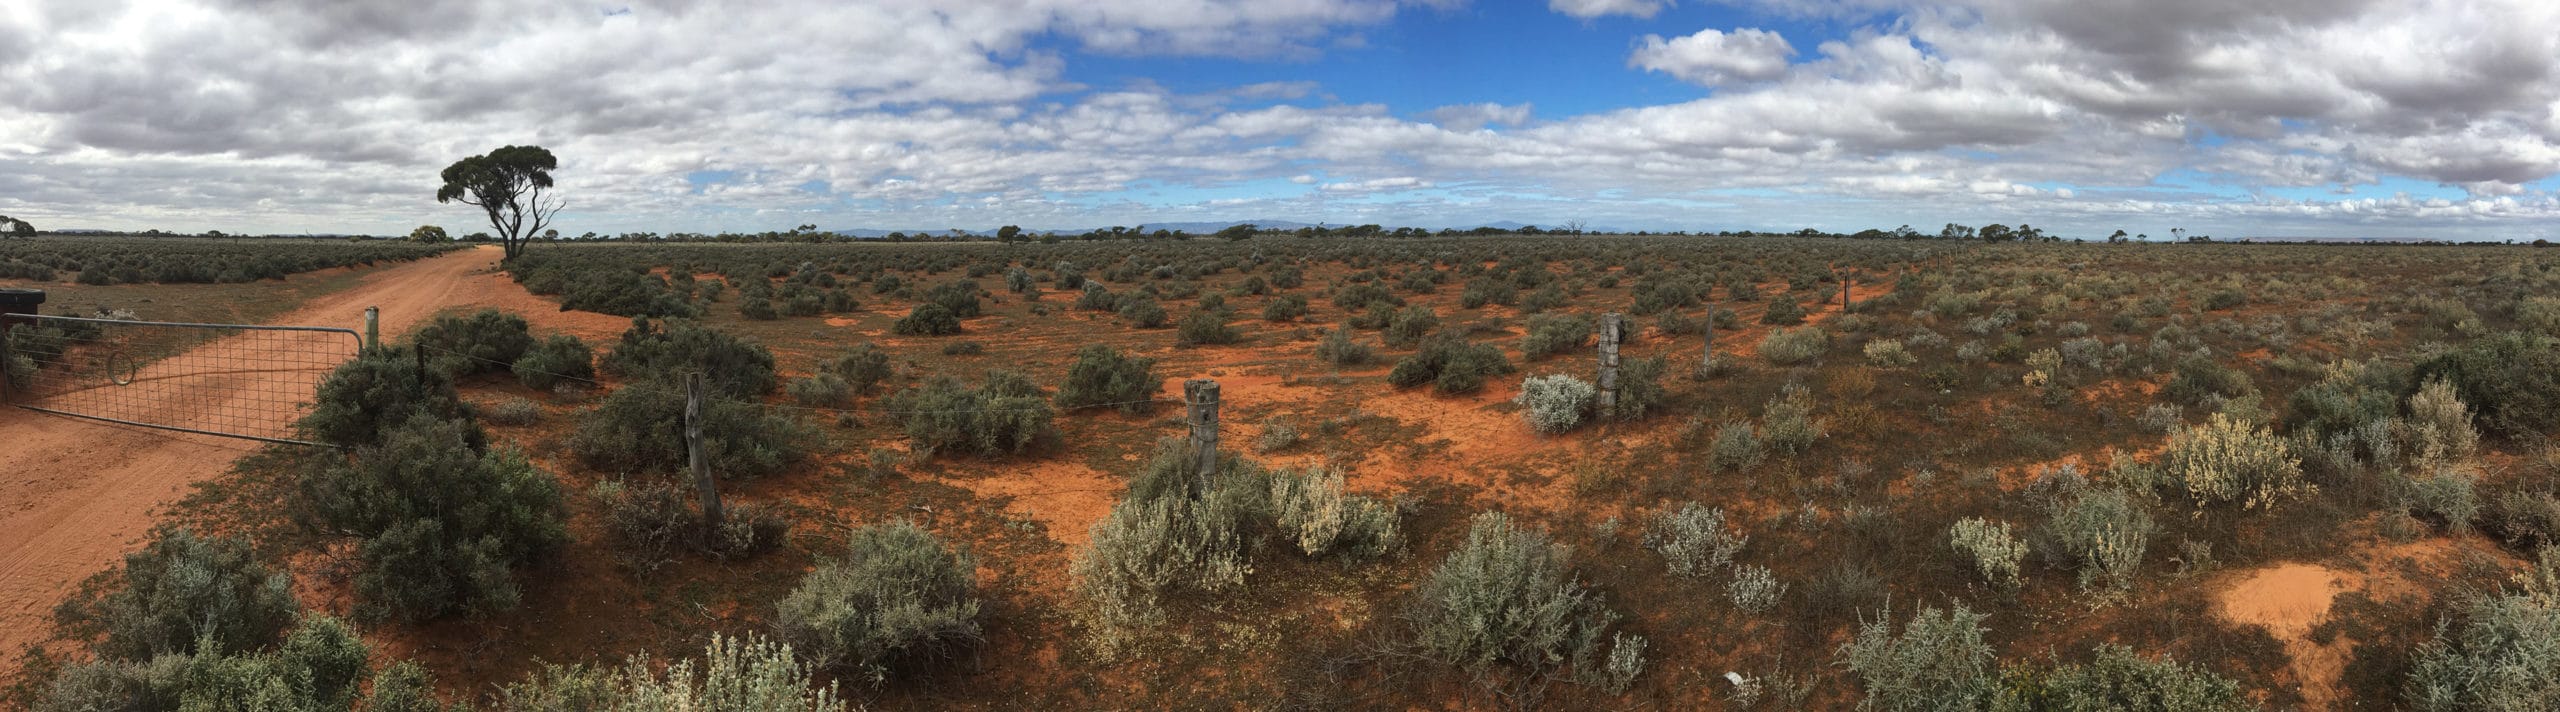 The project is to be located approximately 30 kms north of the town of Port Augusta on a vast pastoral station.